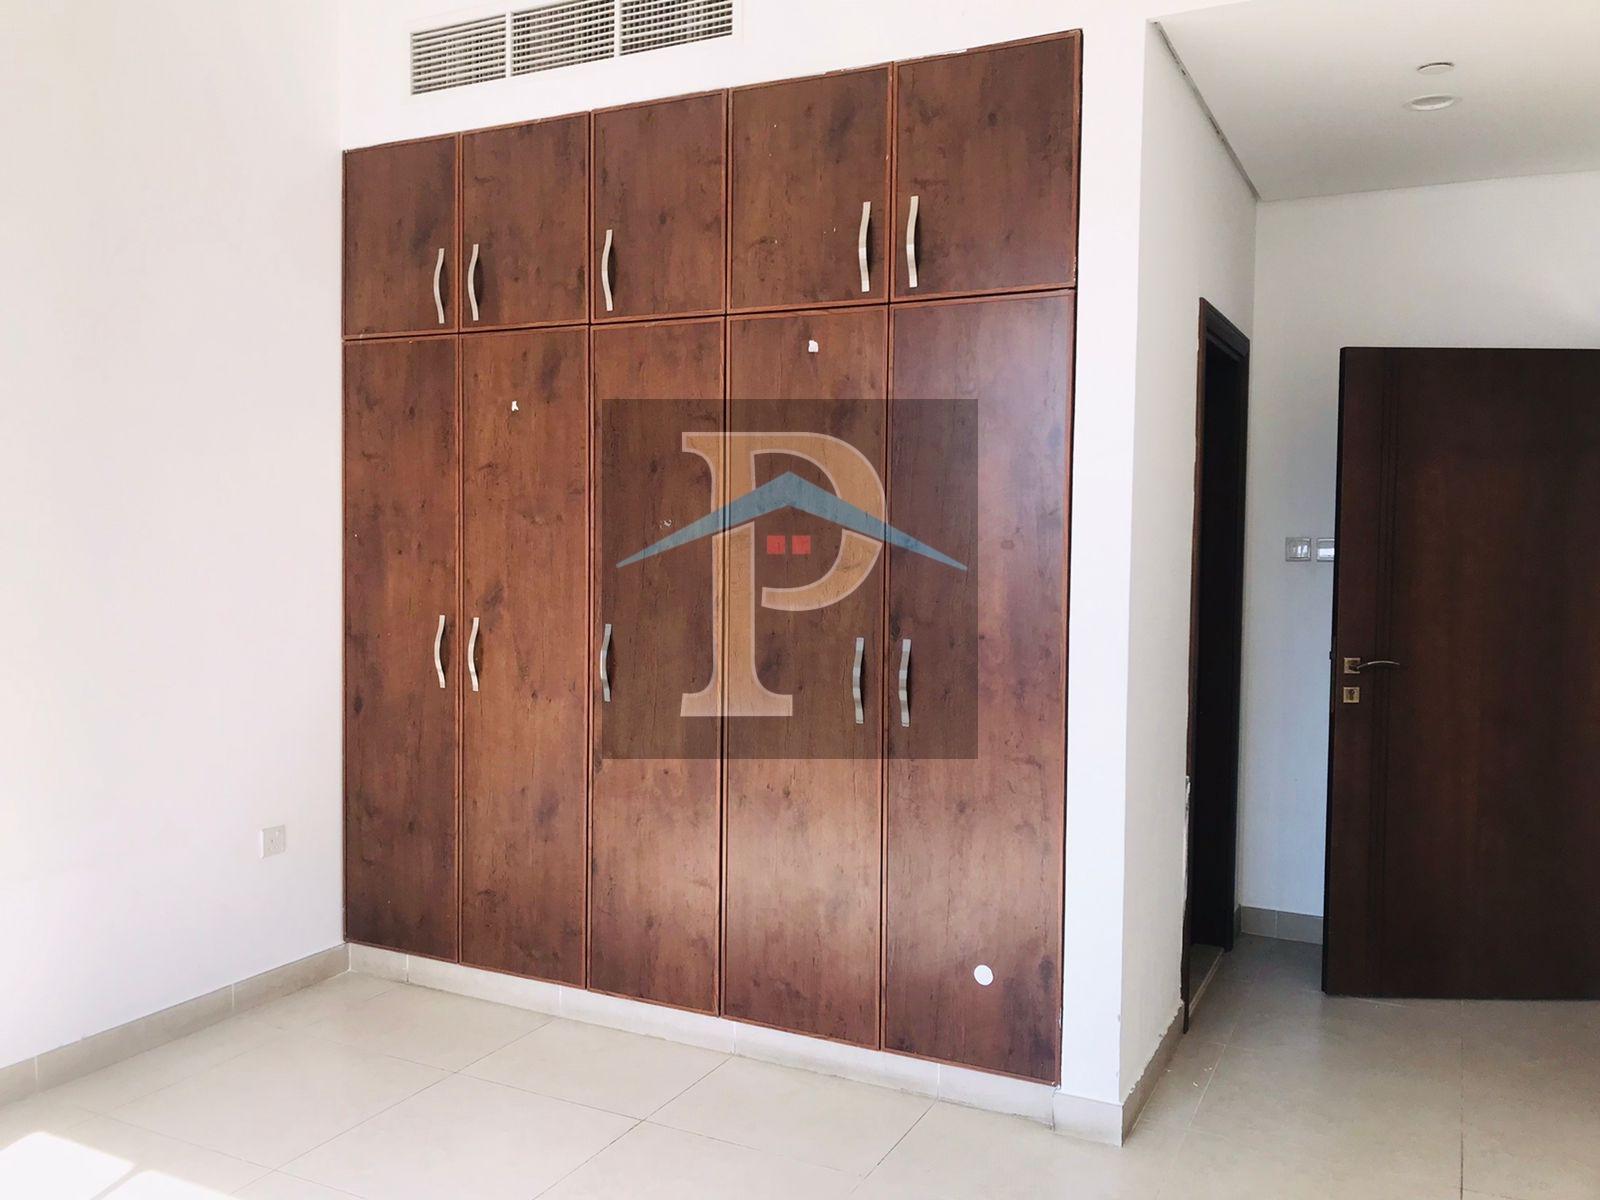 2 bed, 3 bath Apartment for rent in Bur Dubai, Dubai for price AED 69999 yearly 